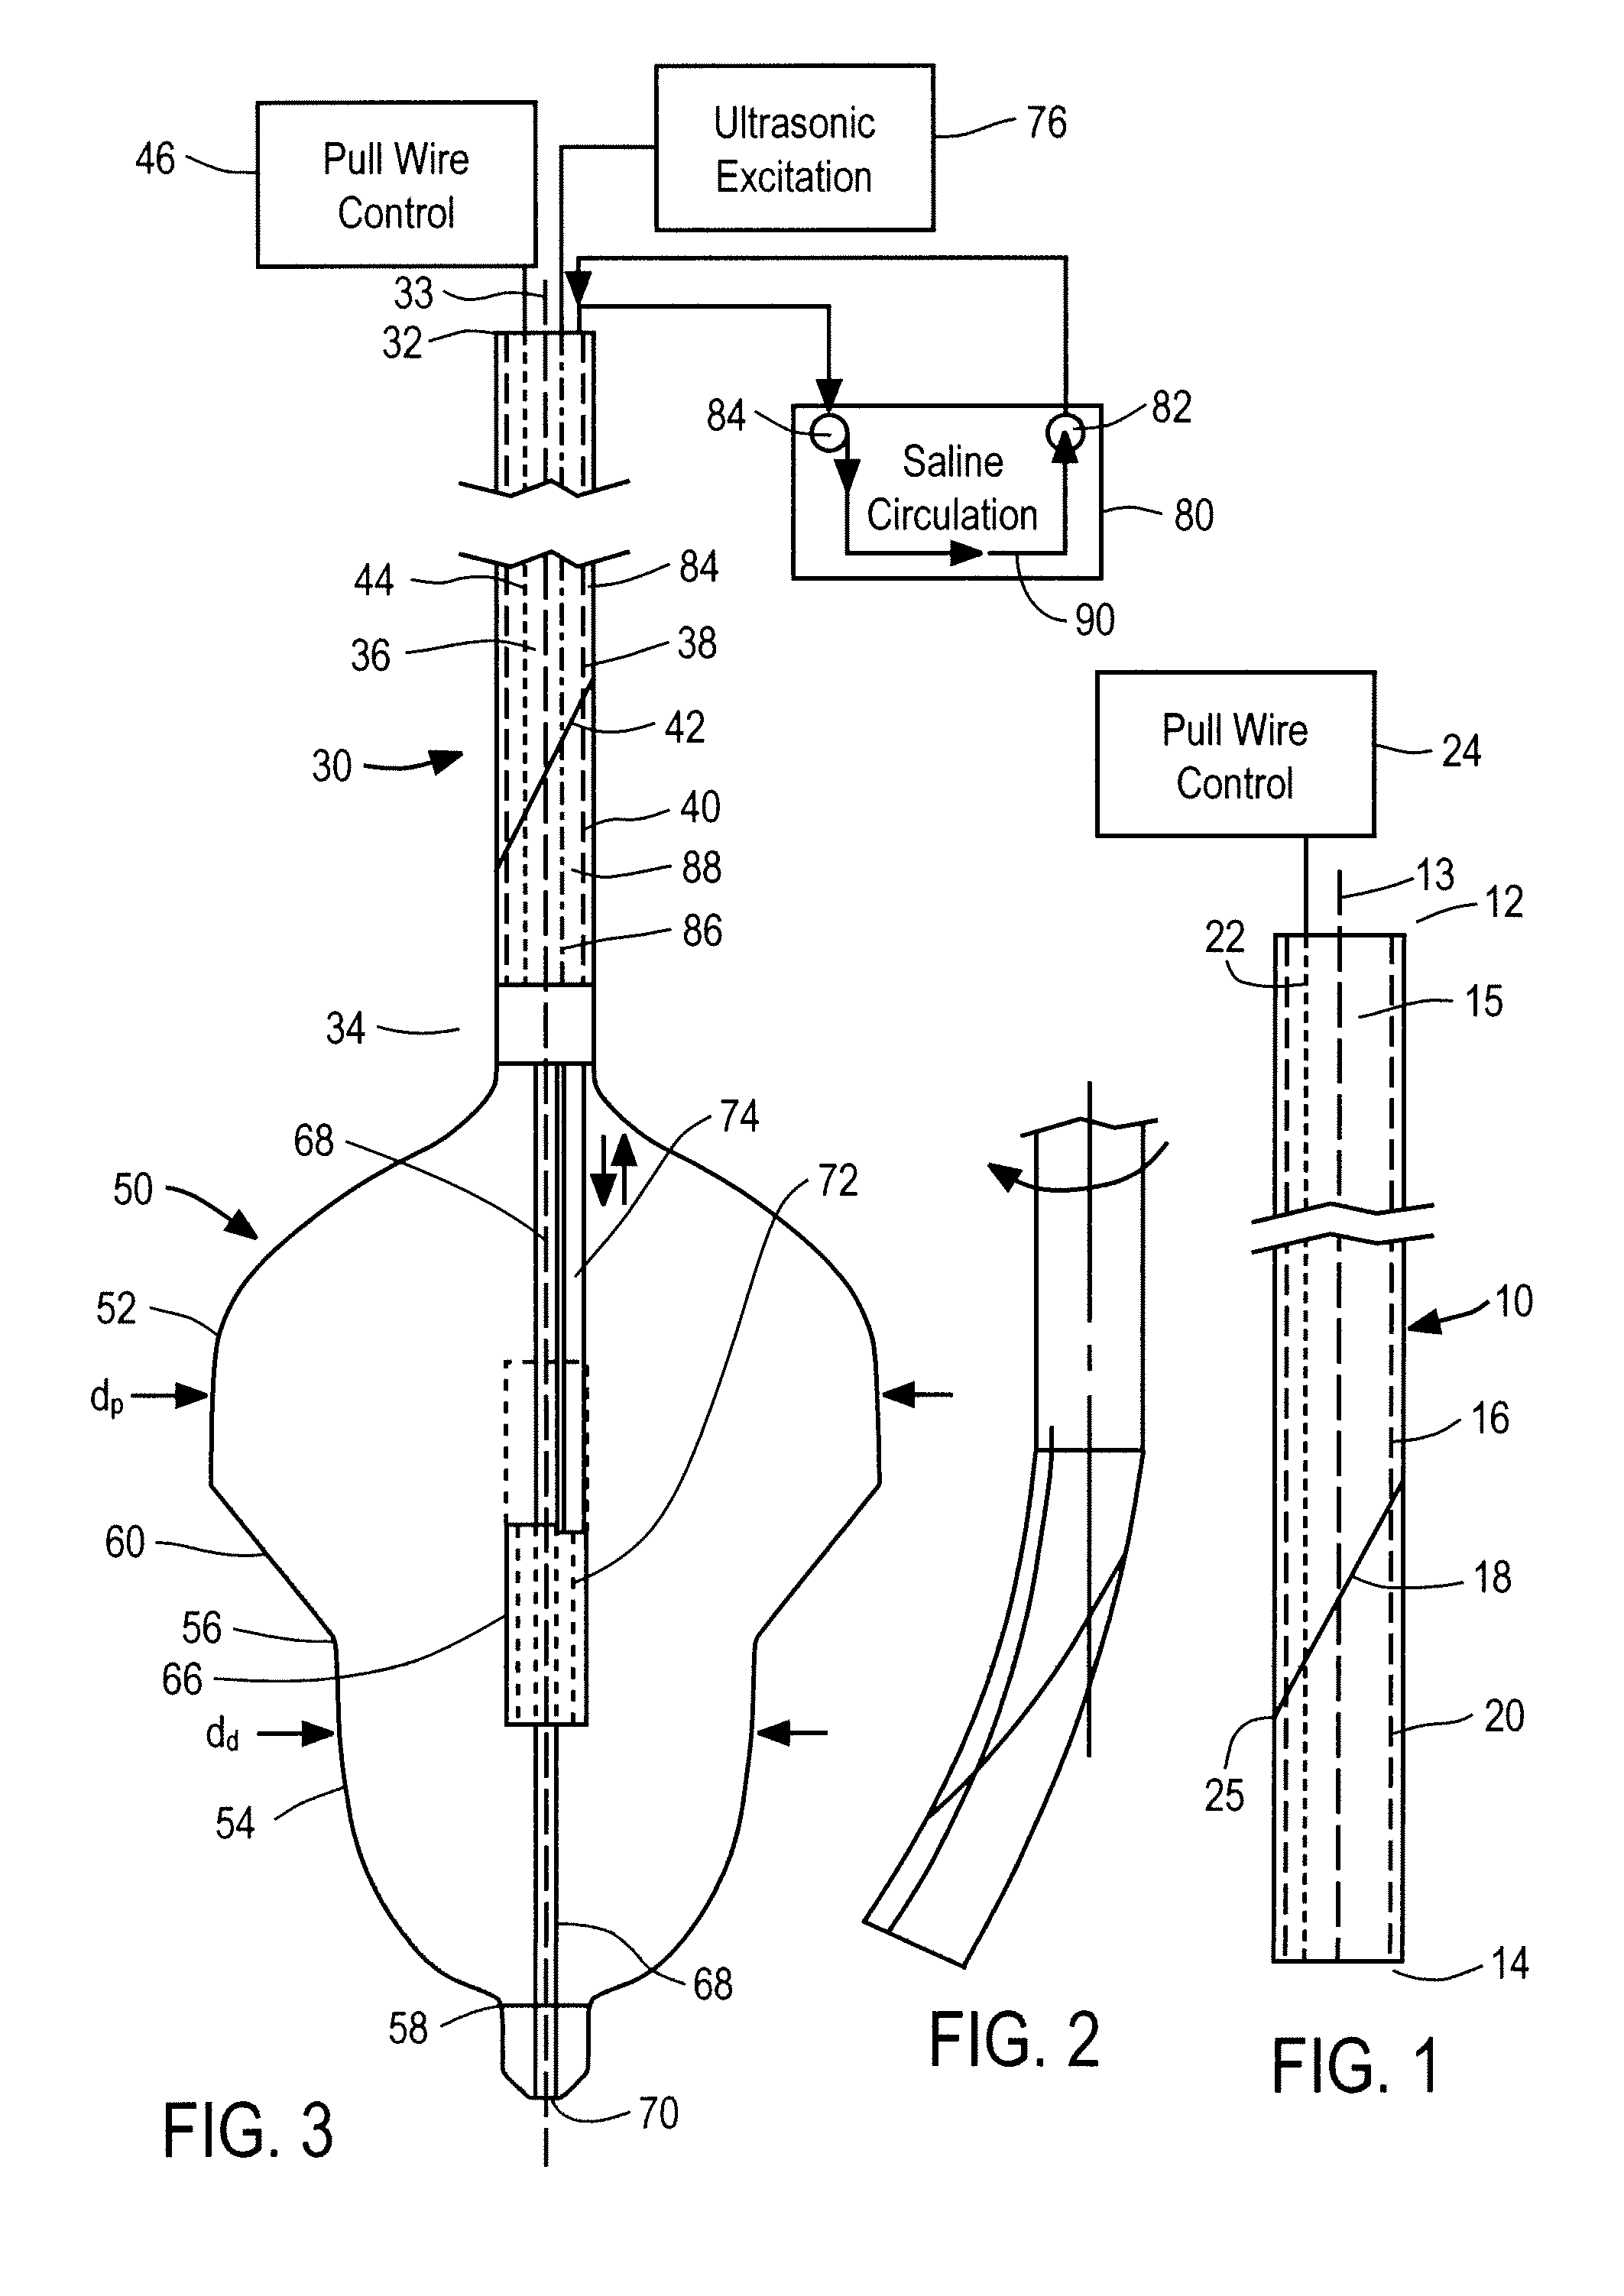 Methods and apparatus for treatment of mitral valve insufficiency